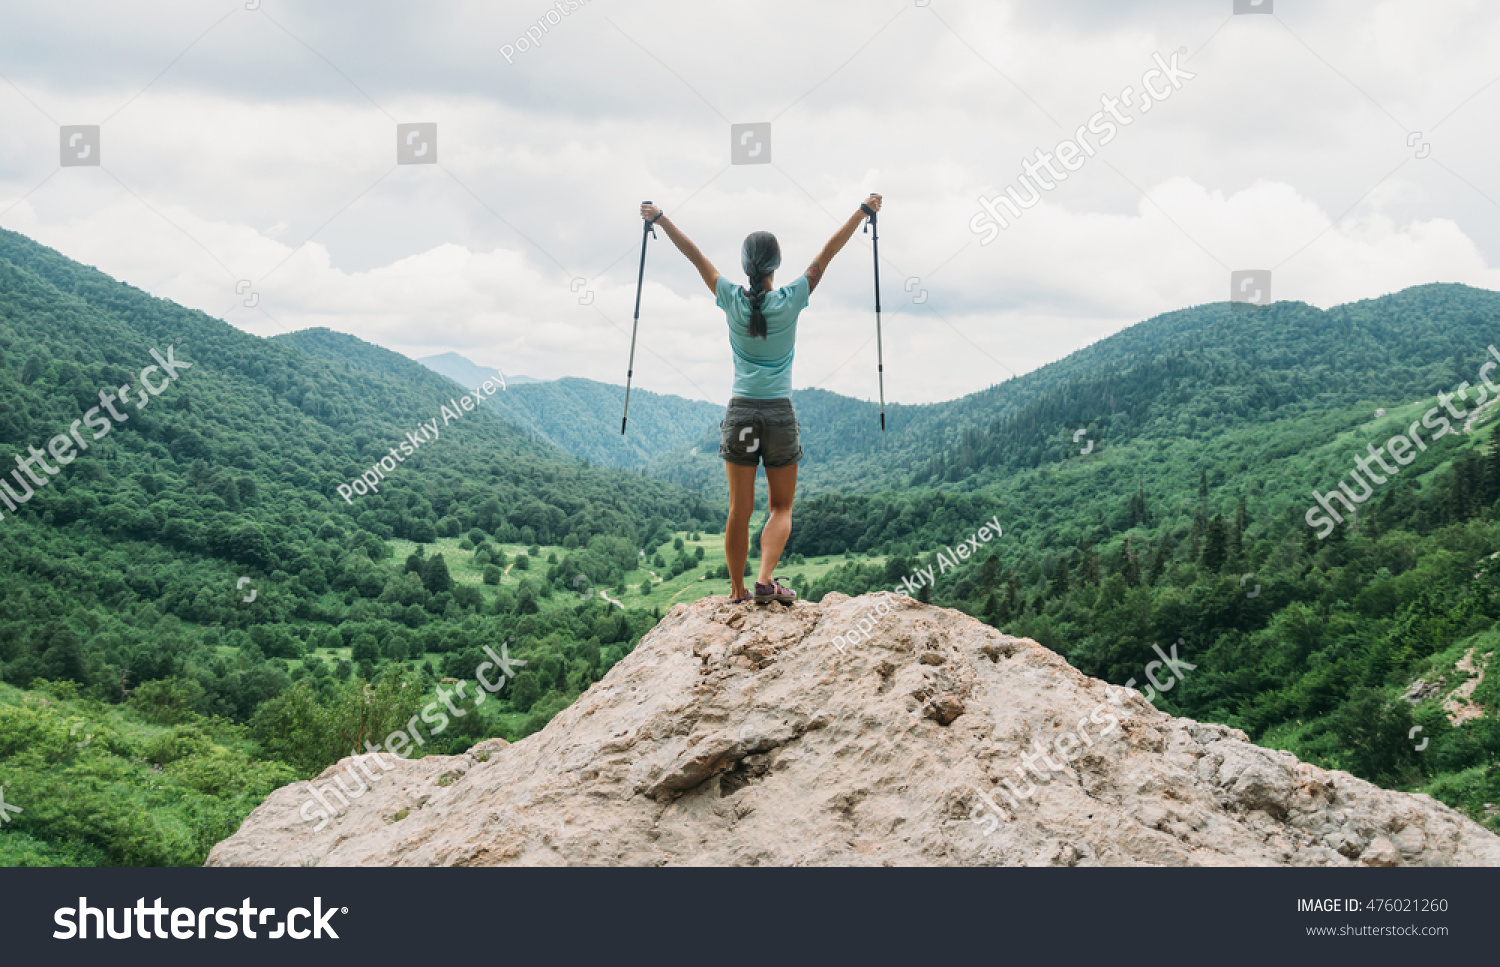 Happy hiker young woman with trekking poles standing on peak of cliff in summer mountains #476021260